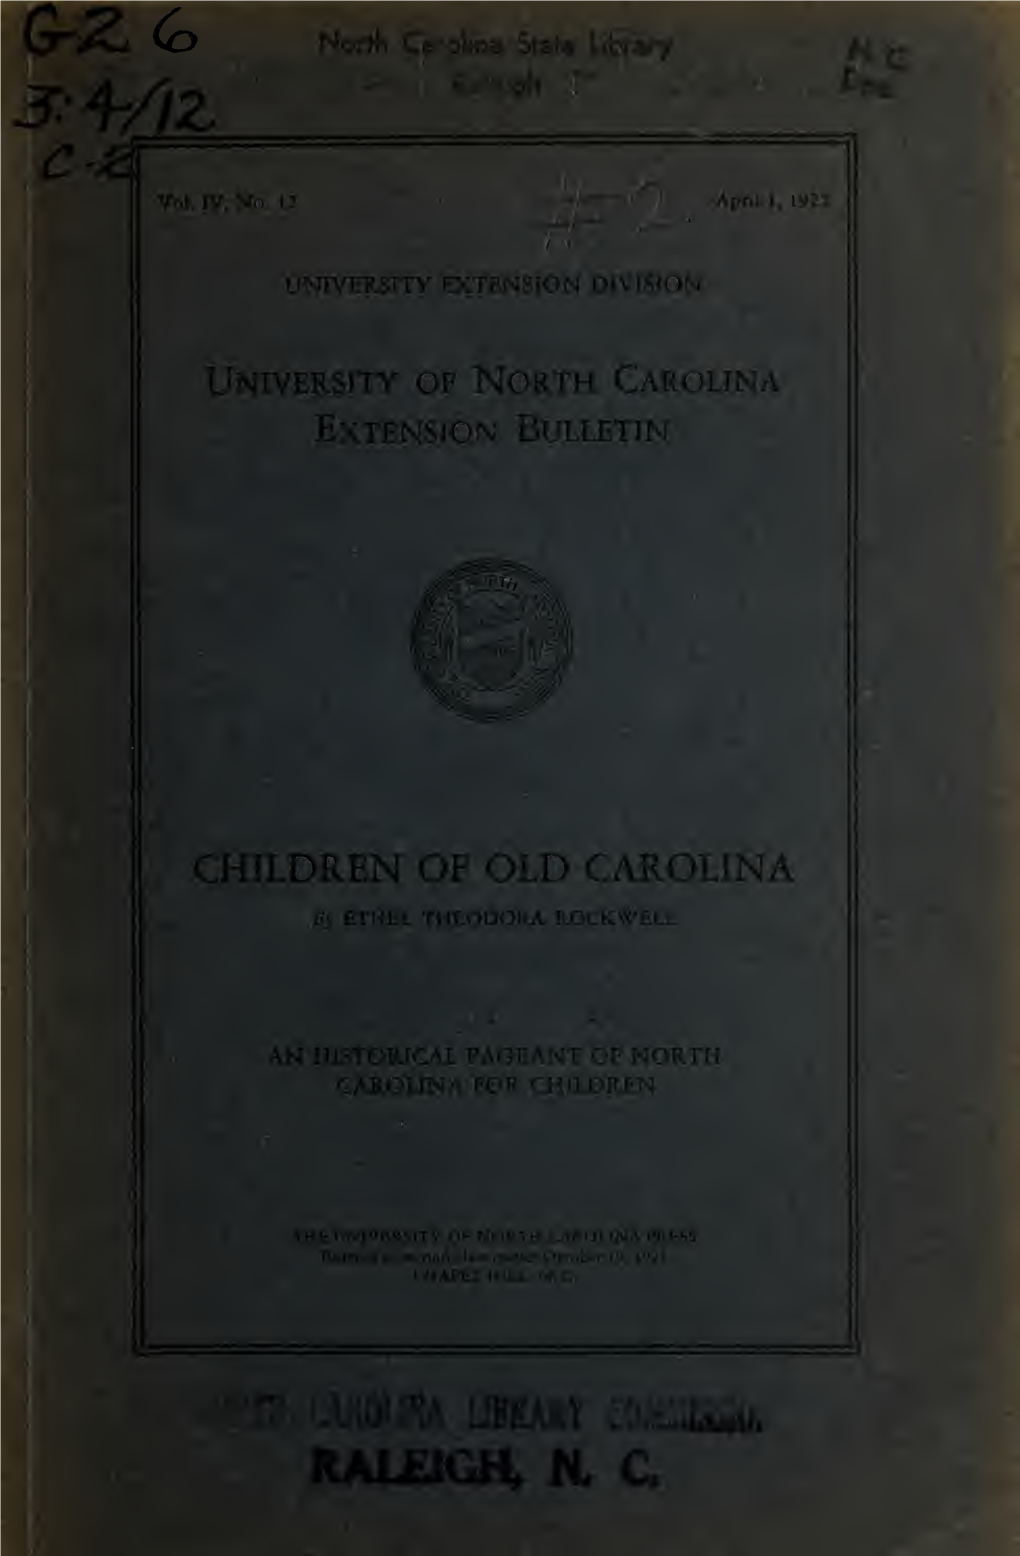 An Historical Pageant of North Carolina for Children / by Ethel